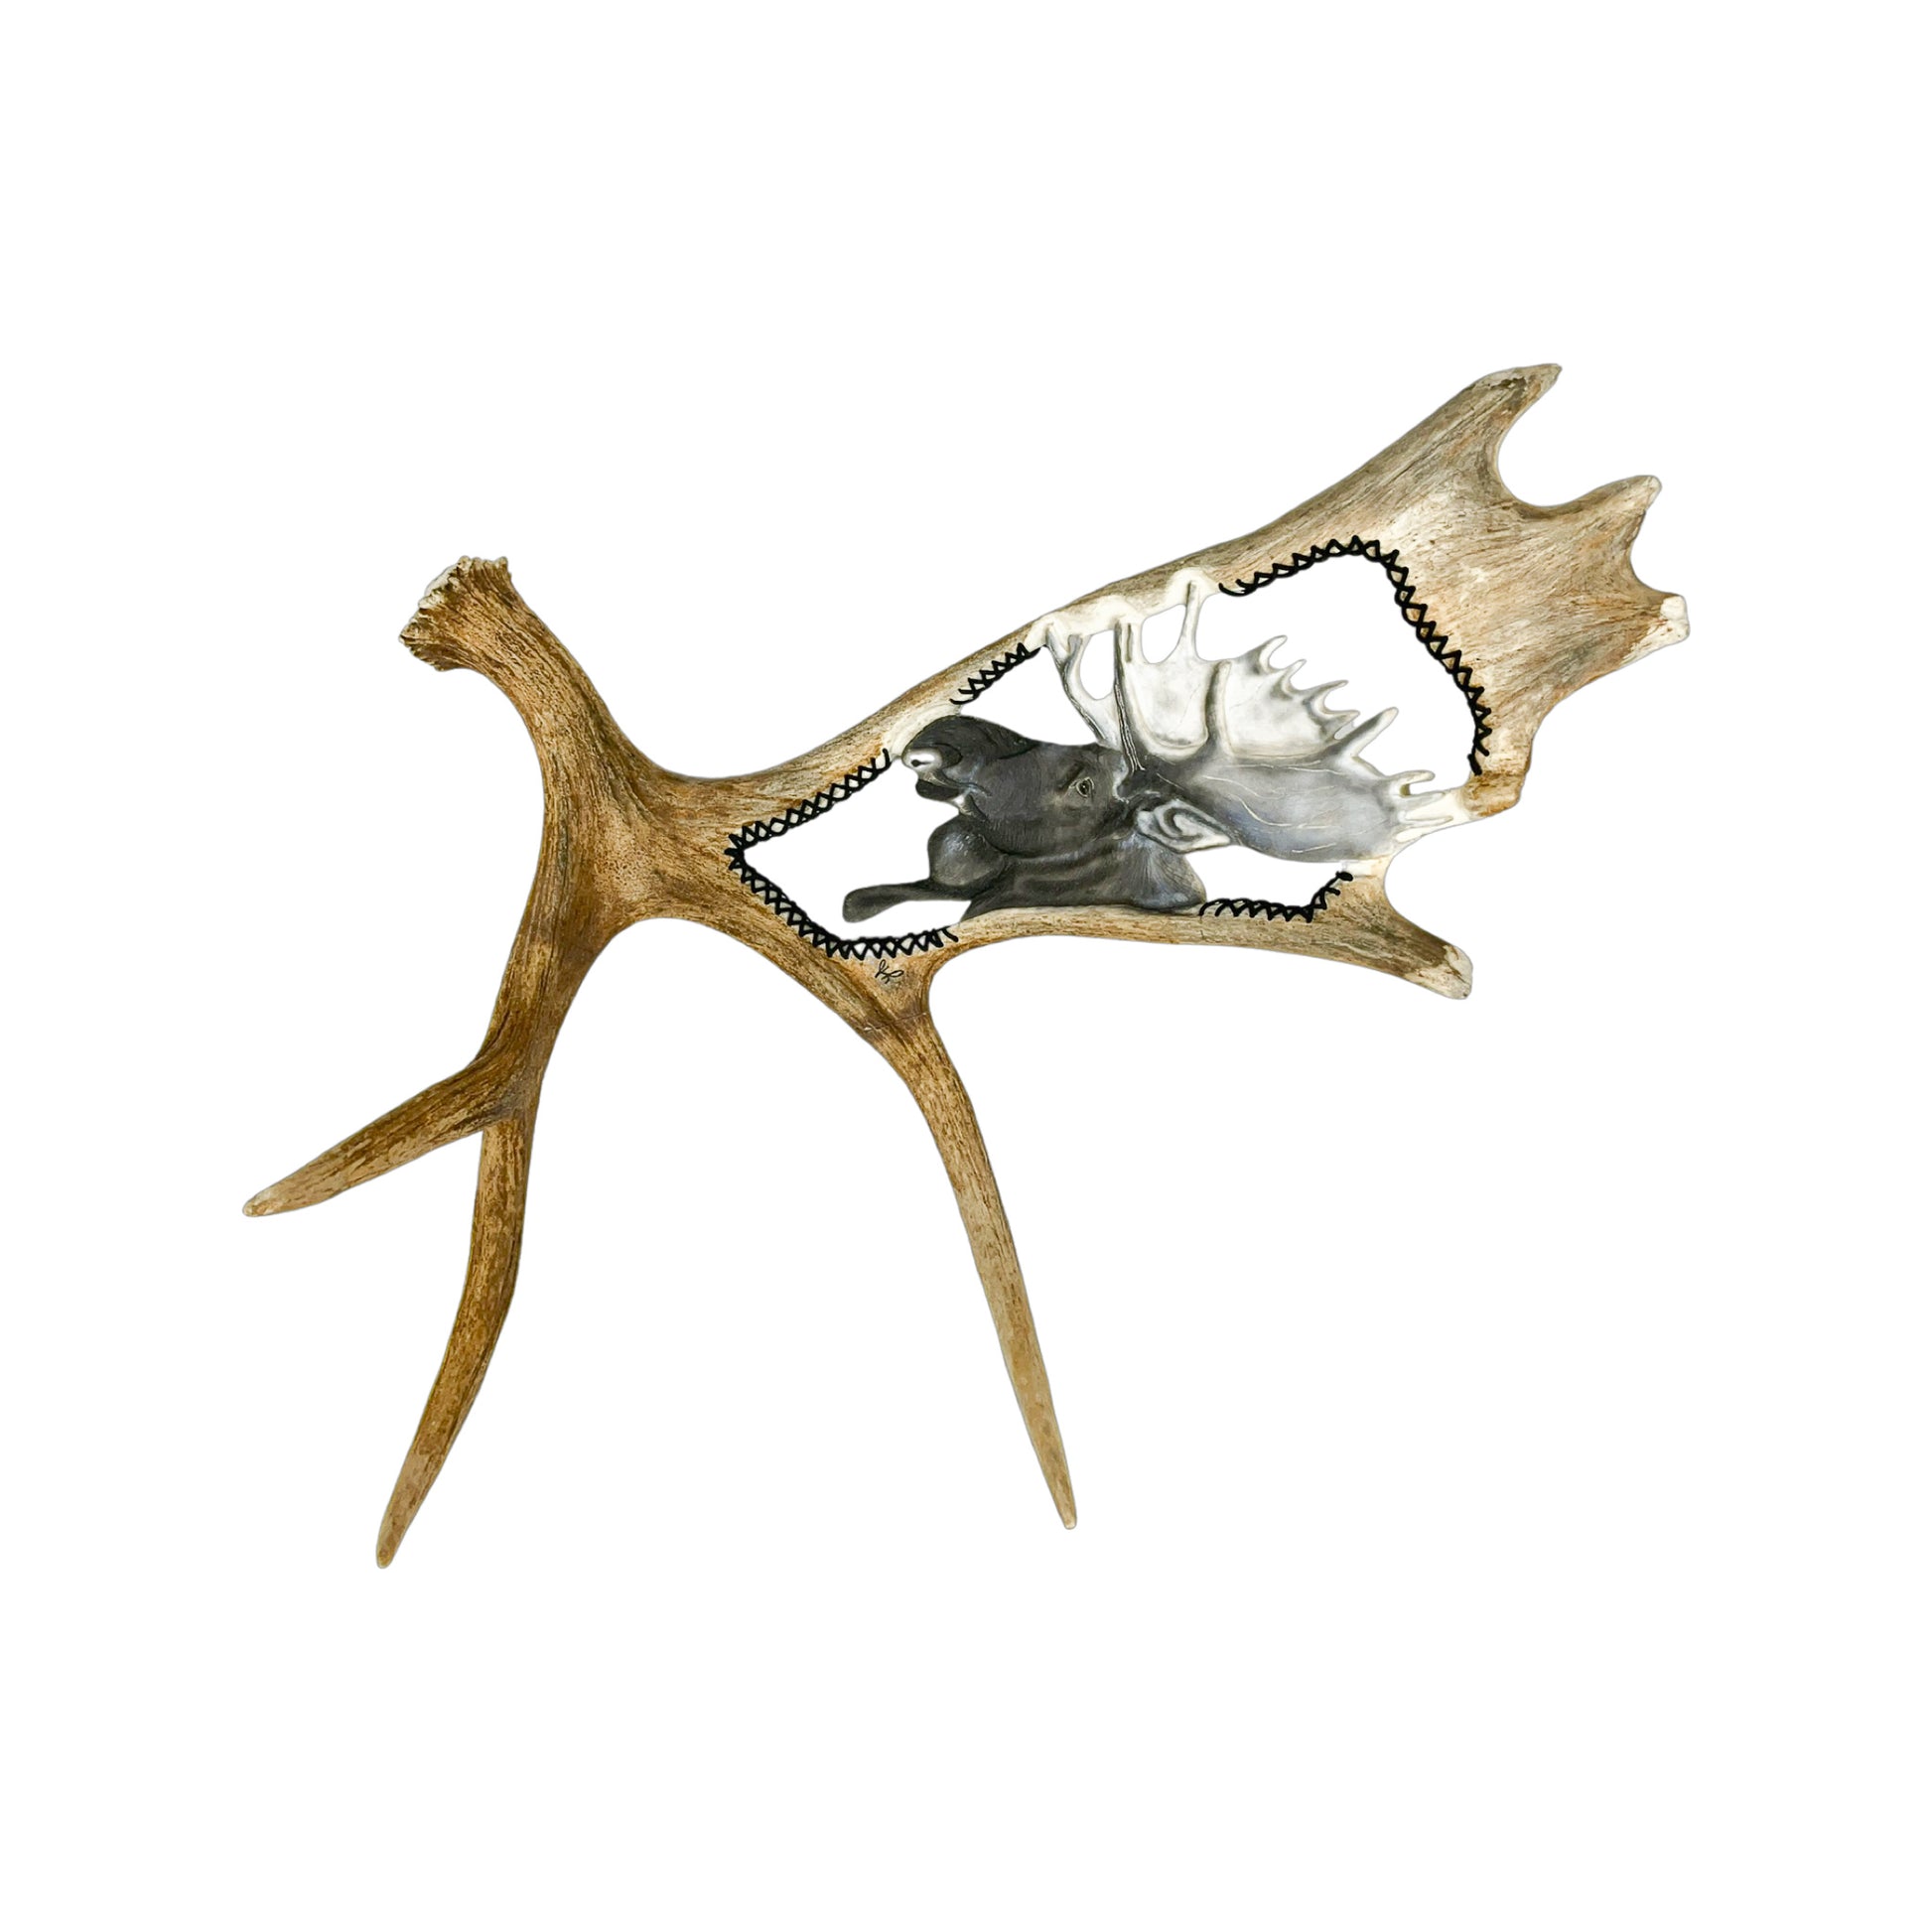 A Moose Engraved Antler Taxidermy Wall Decor featuring a moose head